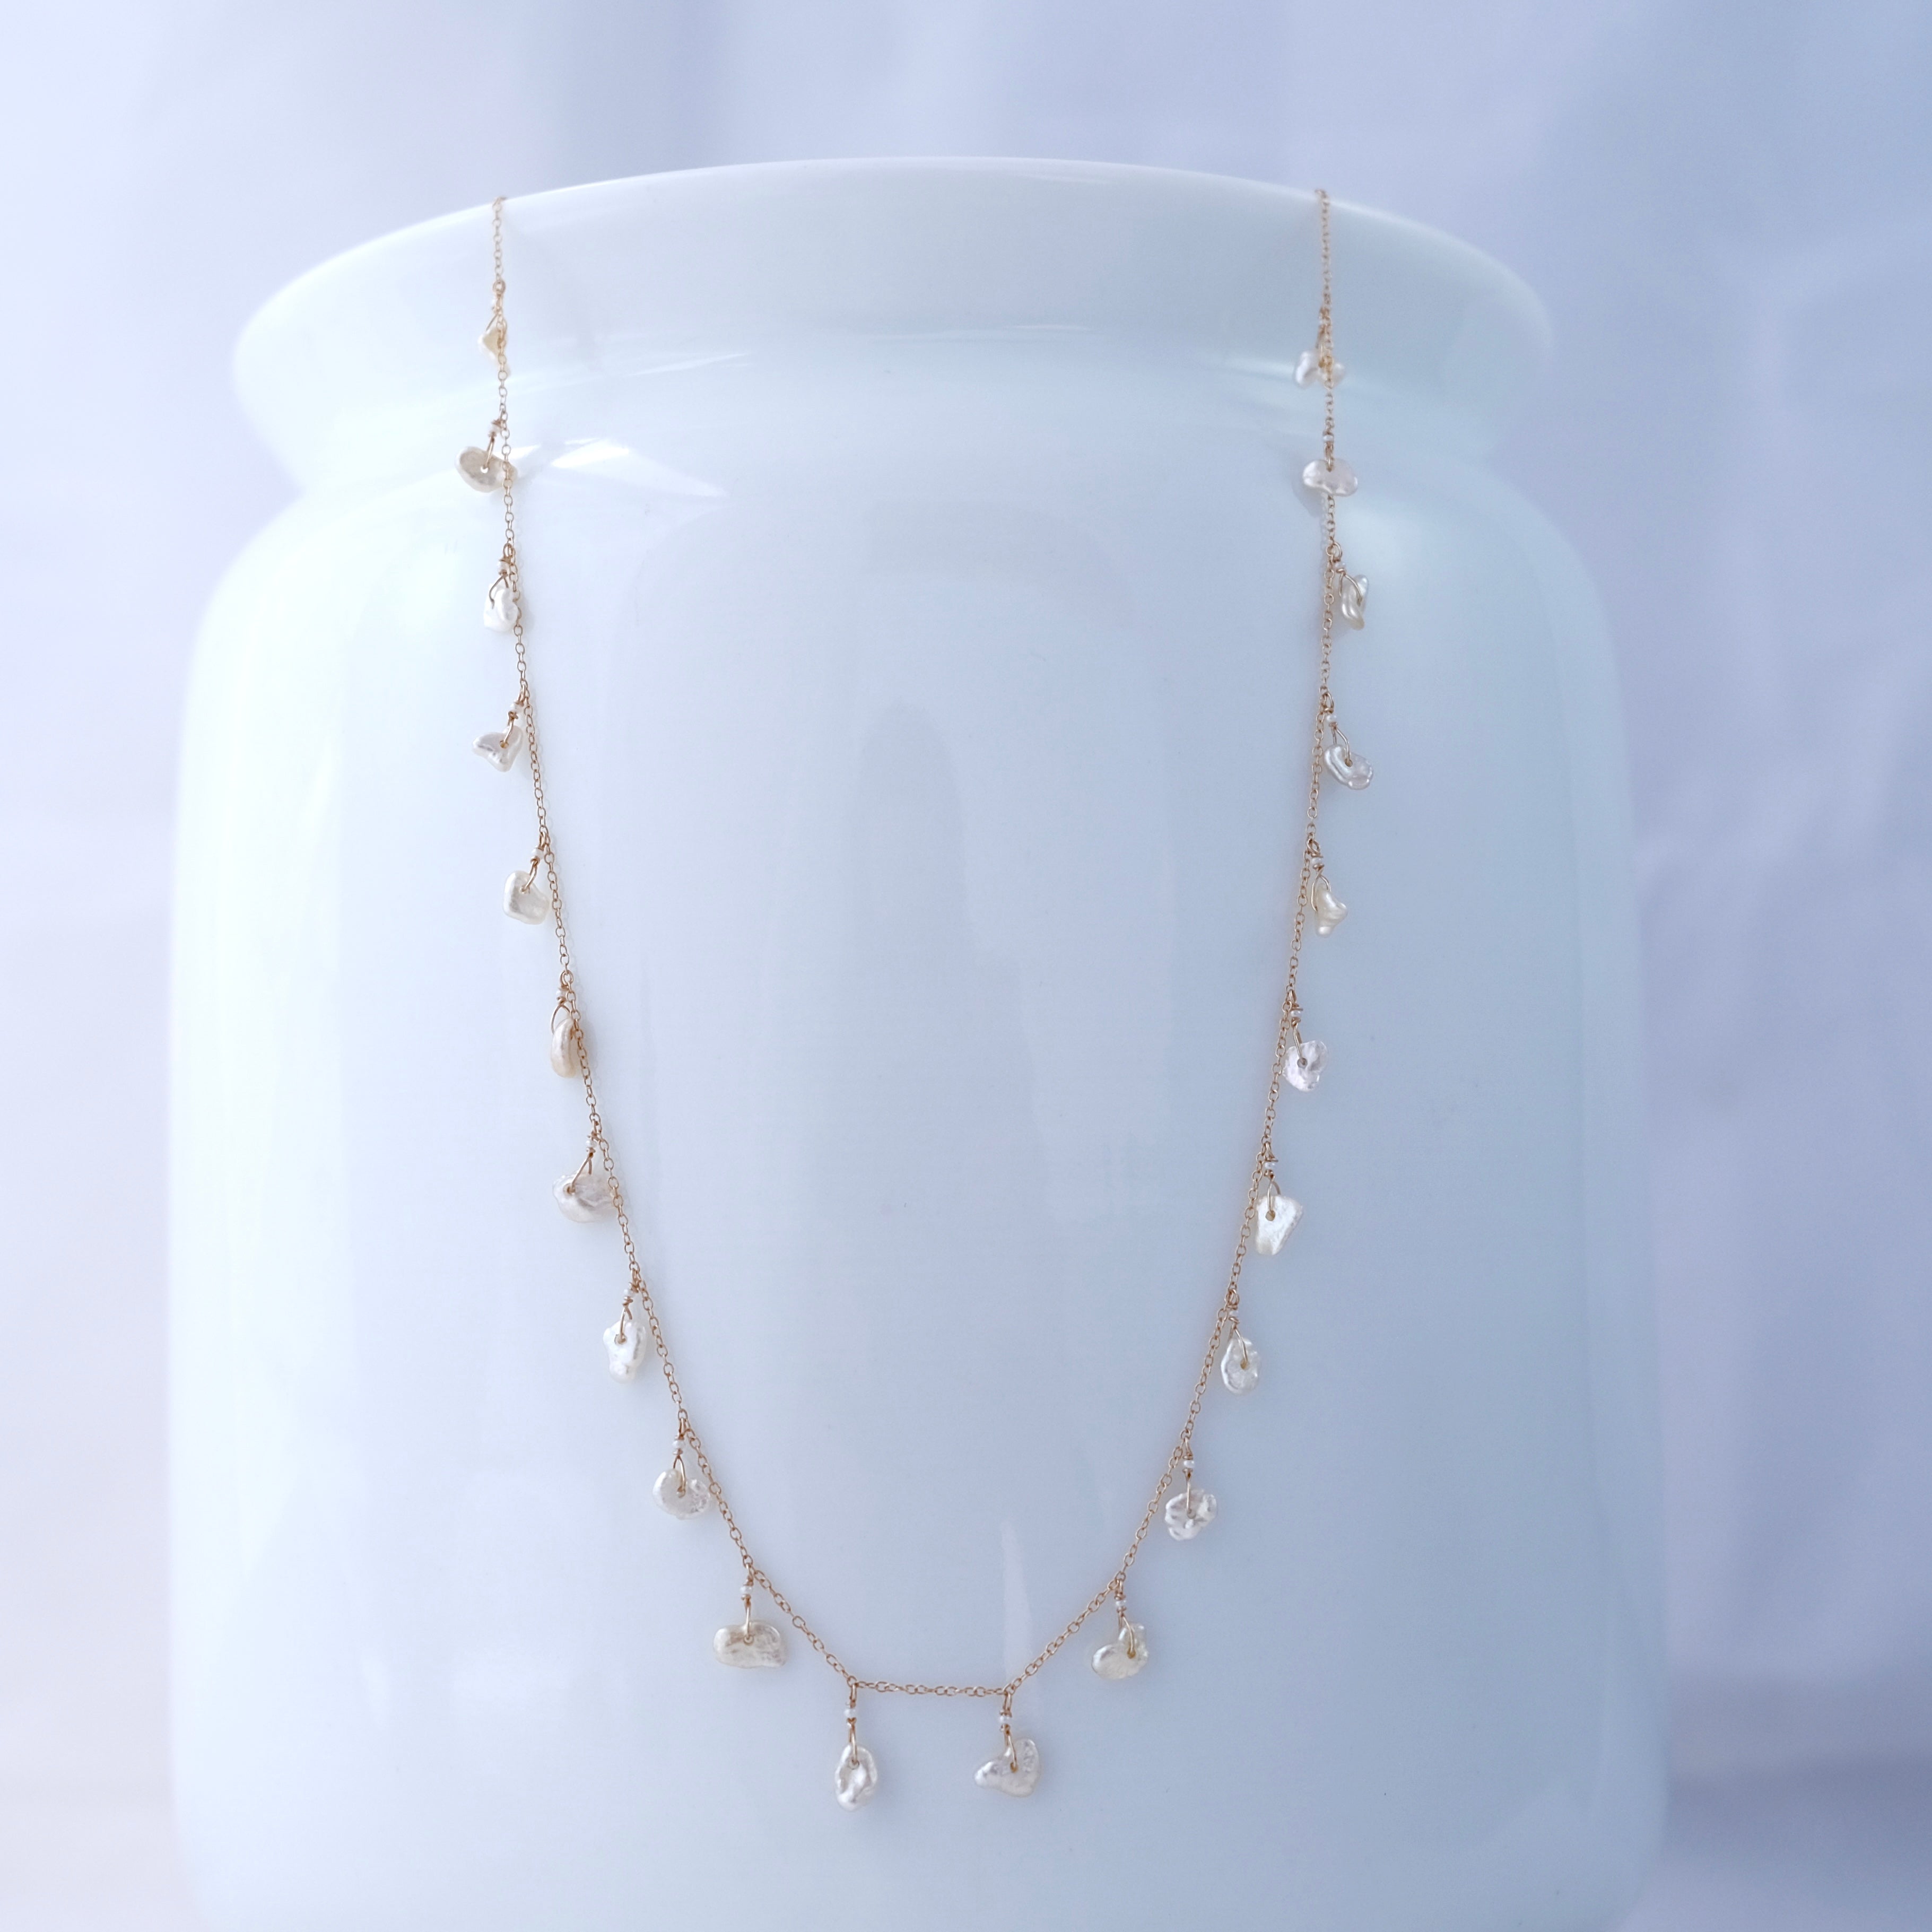 14k Gold Chain Necklace w/ Japanese Akoya Pearls / Saltwater Keshi Pearls & Antique Italian Beads